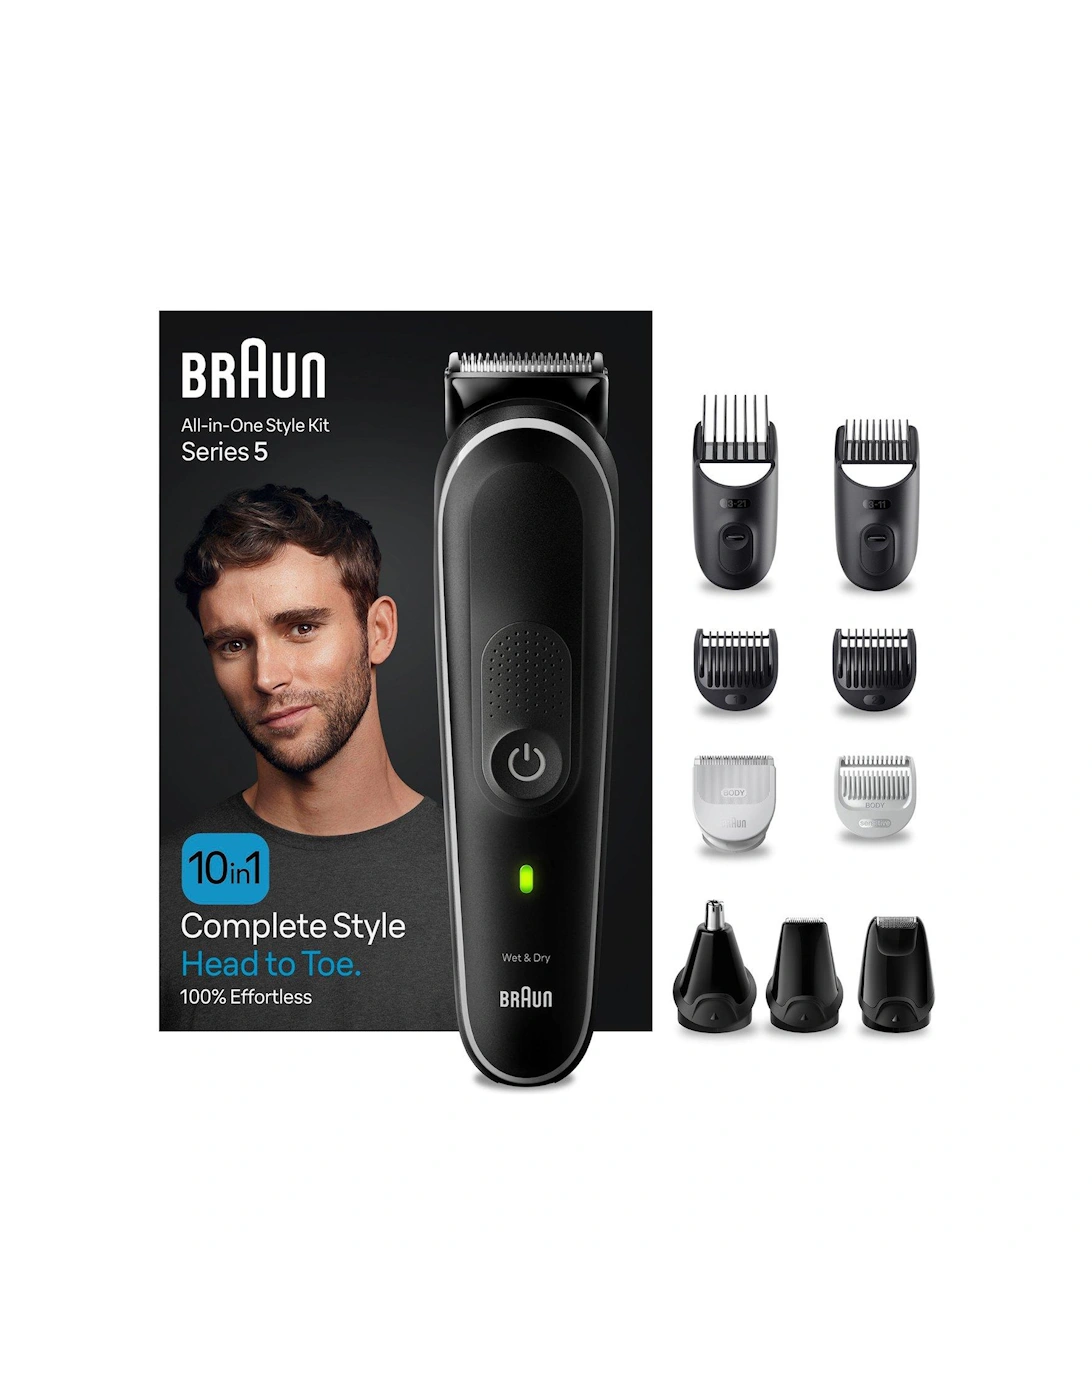 All-In-One Style Kit Series 5 MGK5440, 10-in-1 Kit For Beard, Hair, Manscaping & More